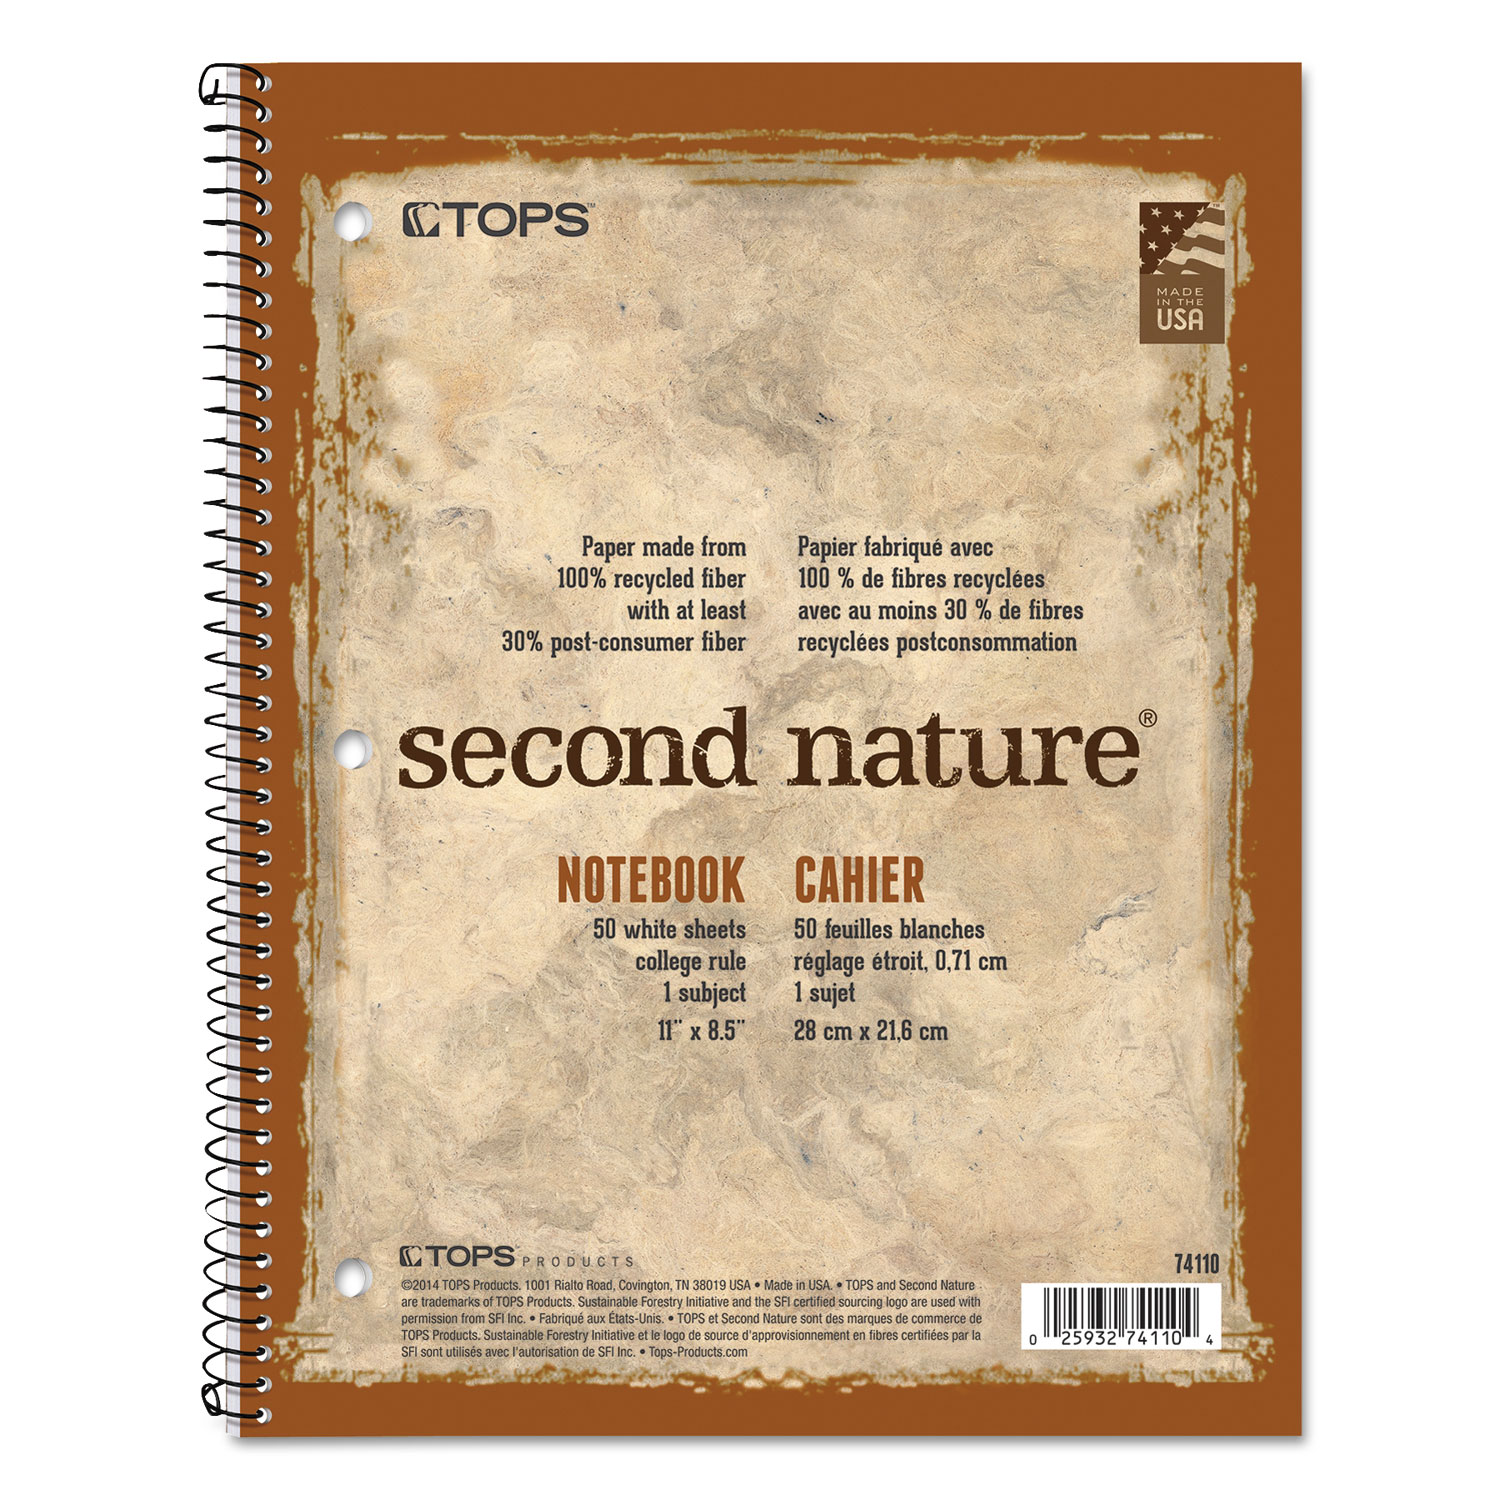  TOPS 74111 Second Nature Single Subject Wirebound Notebooks, Medium/College Rule, Randomly Assorted Color Covers, 11 x 8.5, 80 Sheets (TOP74111) 